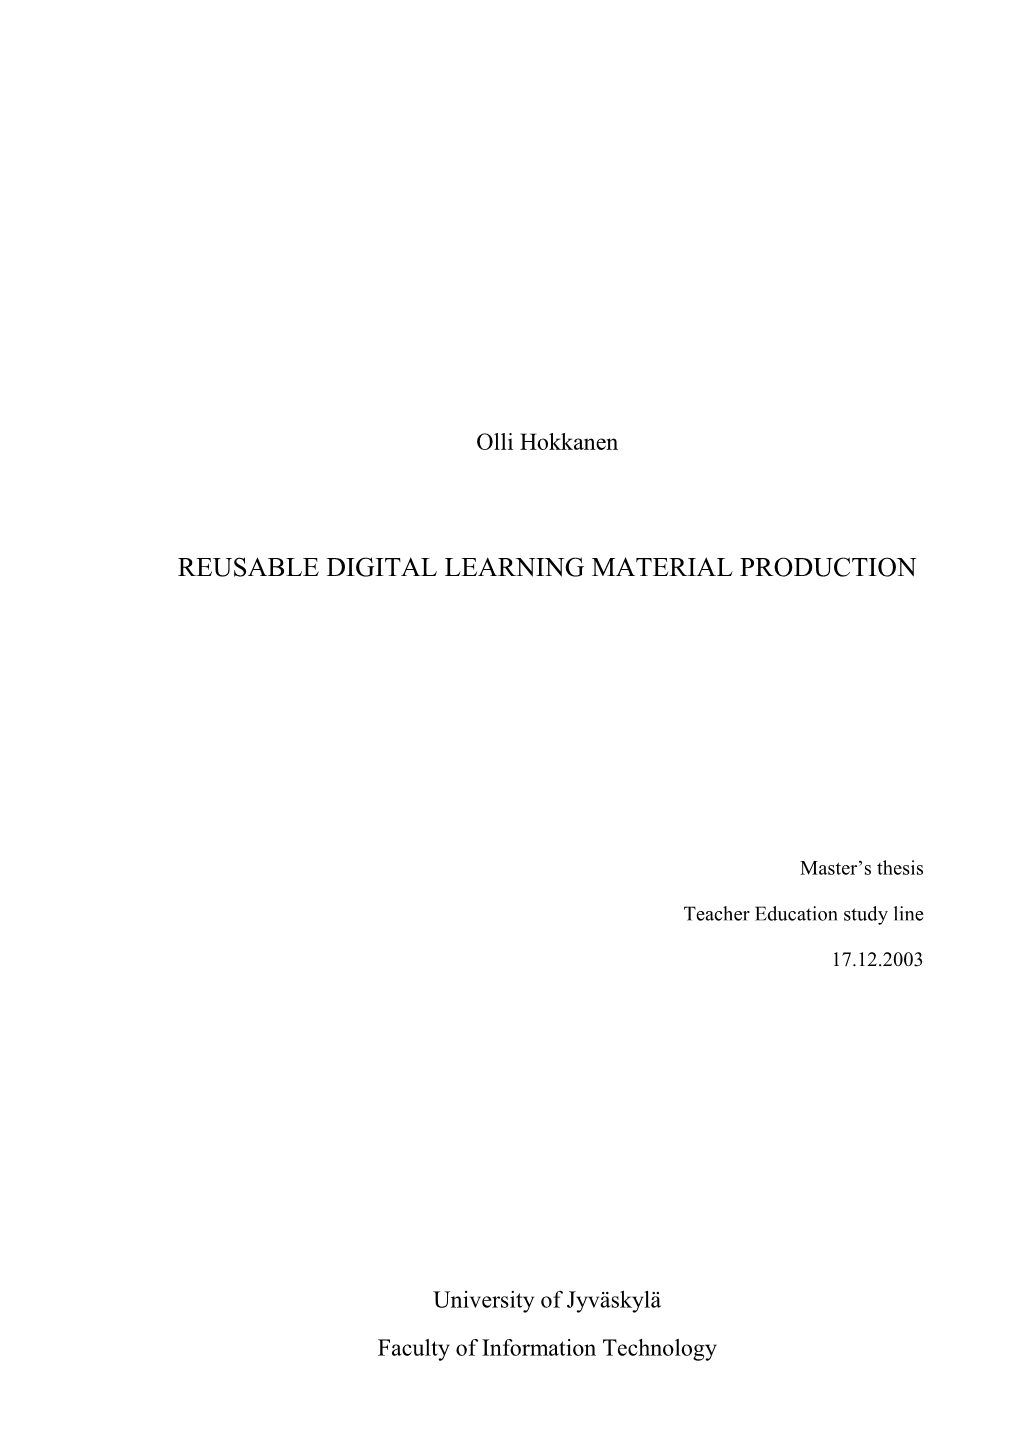 Reusable Digital Learning Material Production